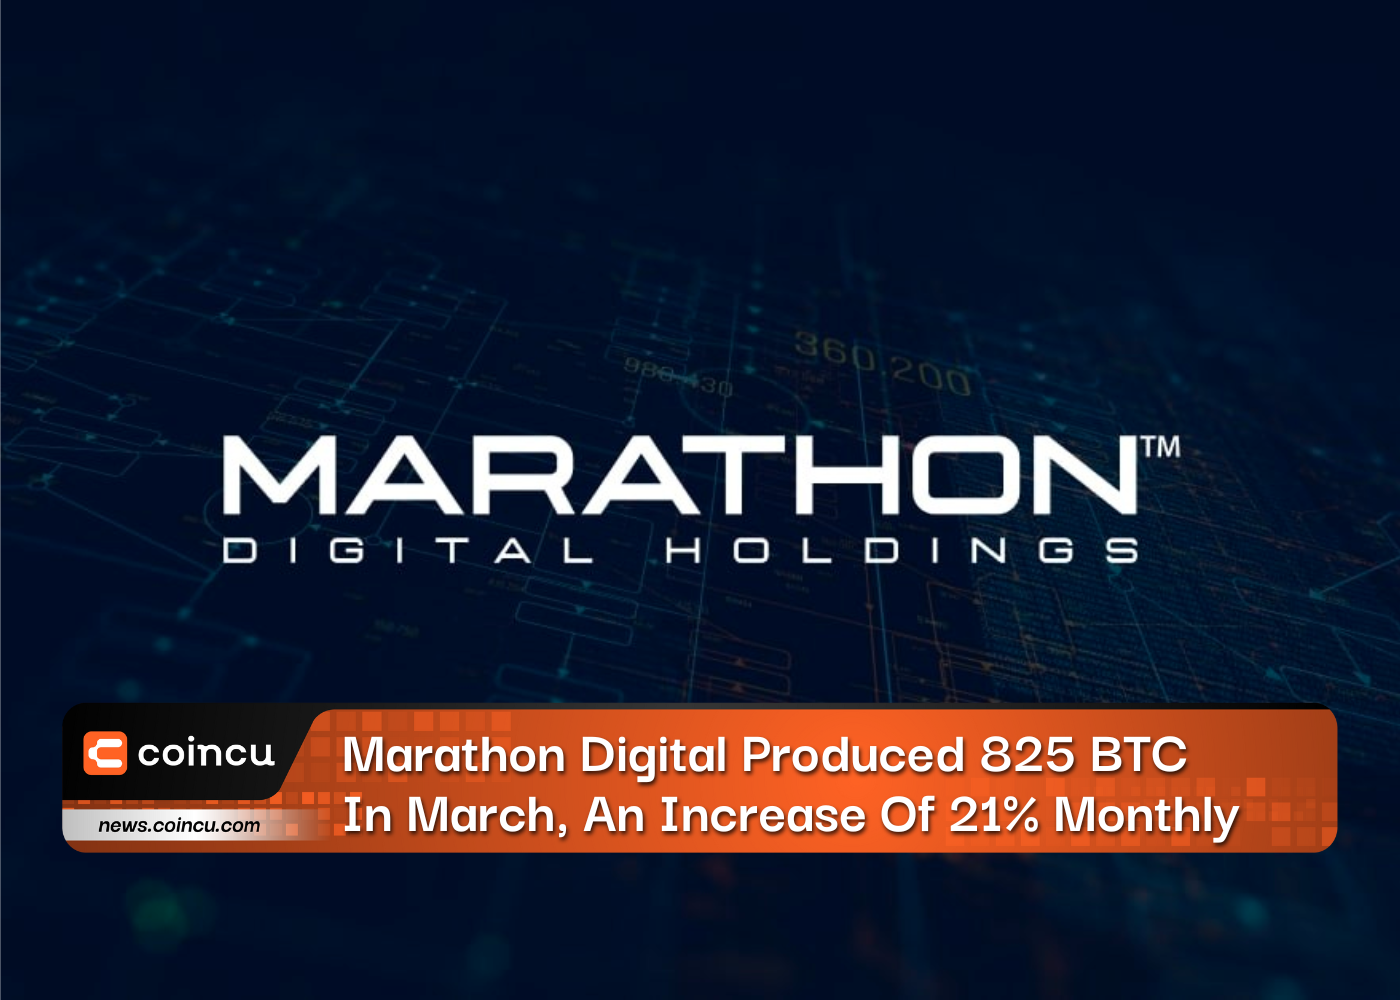 Marathon Digital Produced 825 BTC In March, An Increase Of 21% Monthly